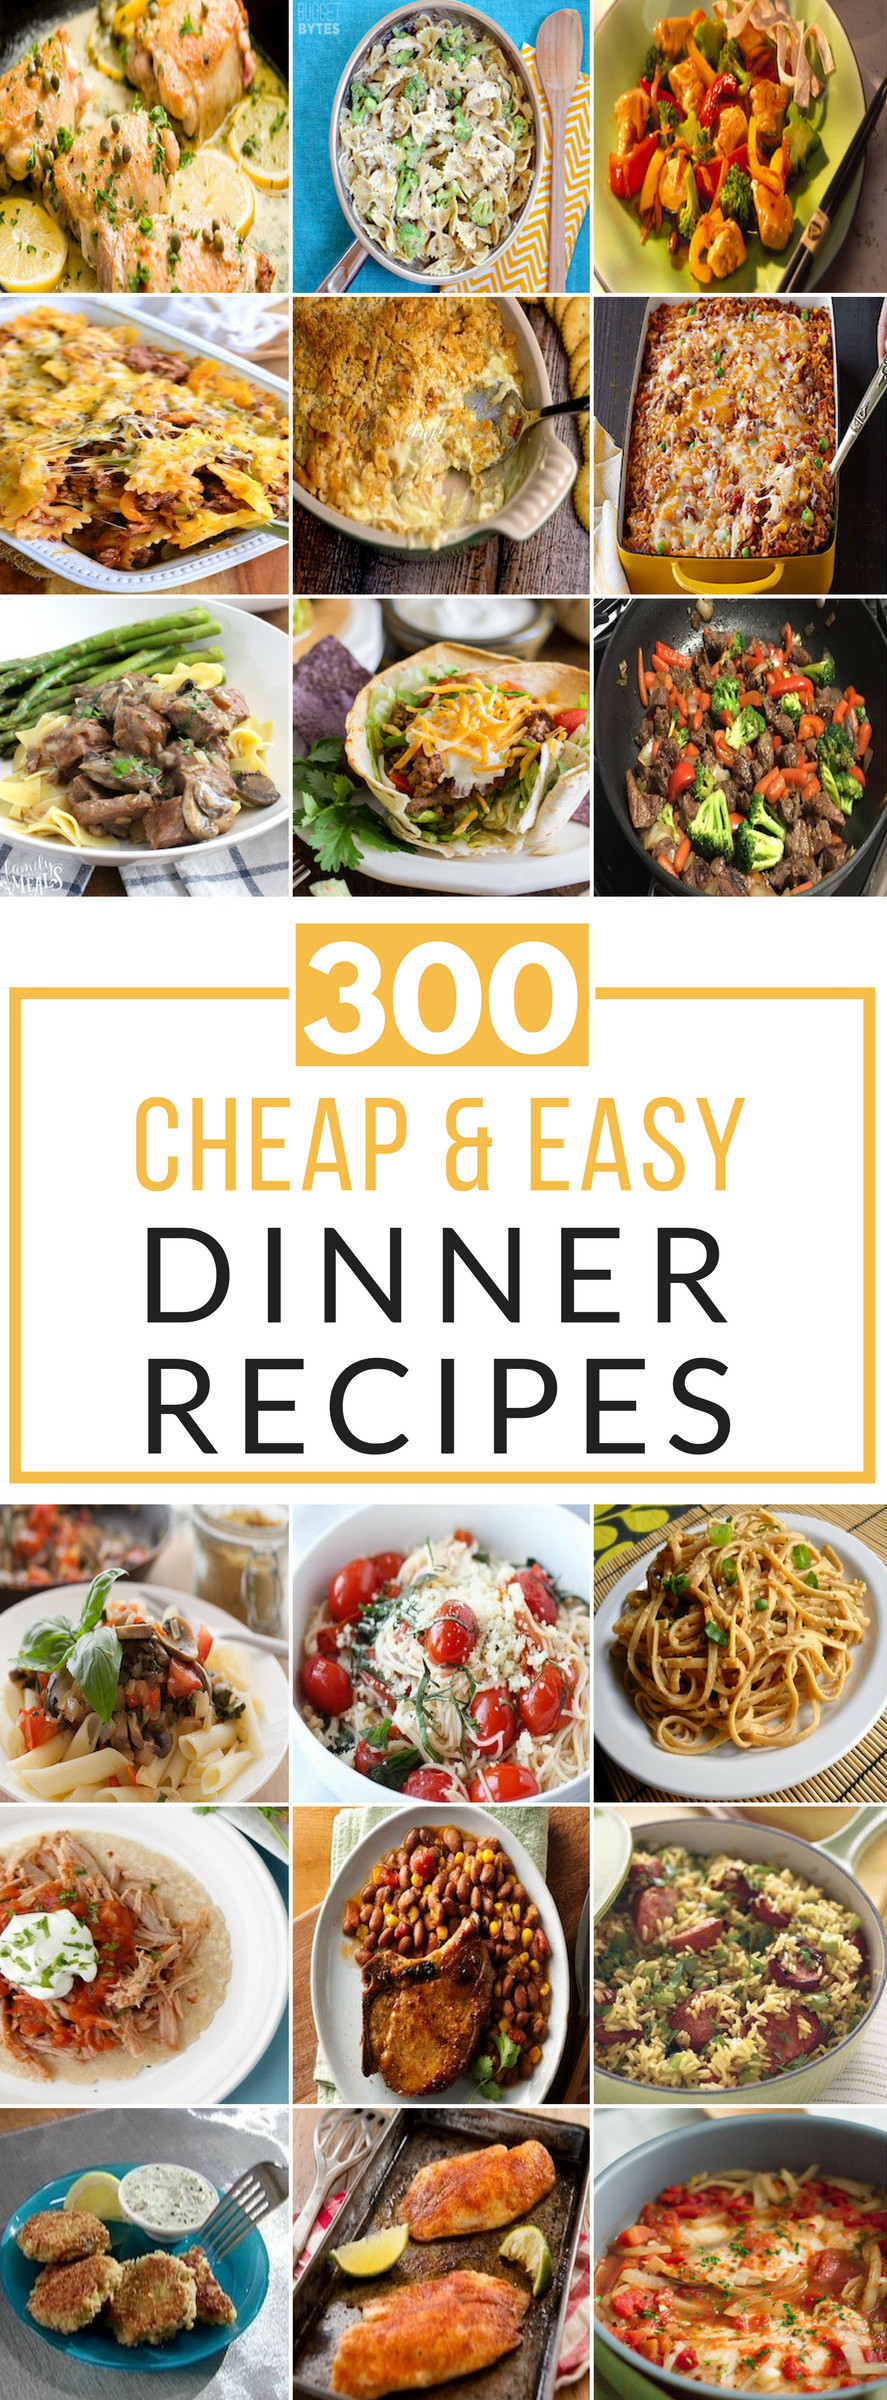 Cheap Dinner Ideas
 300 Cheap and Easy Dinner Recipes Prudent Penny Pincher